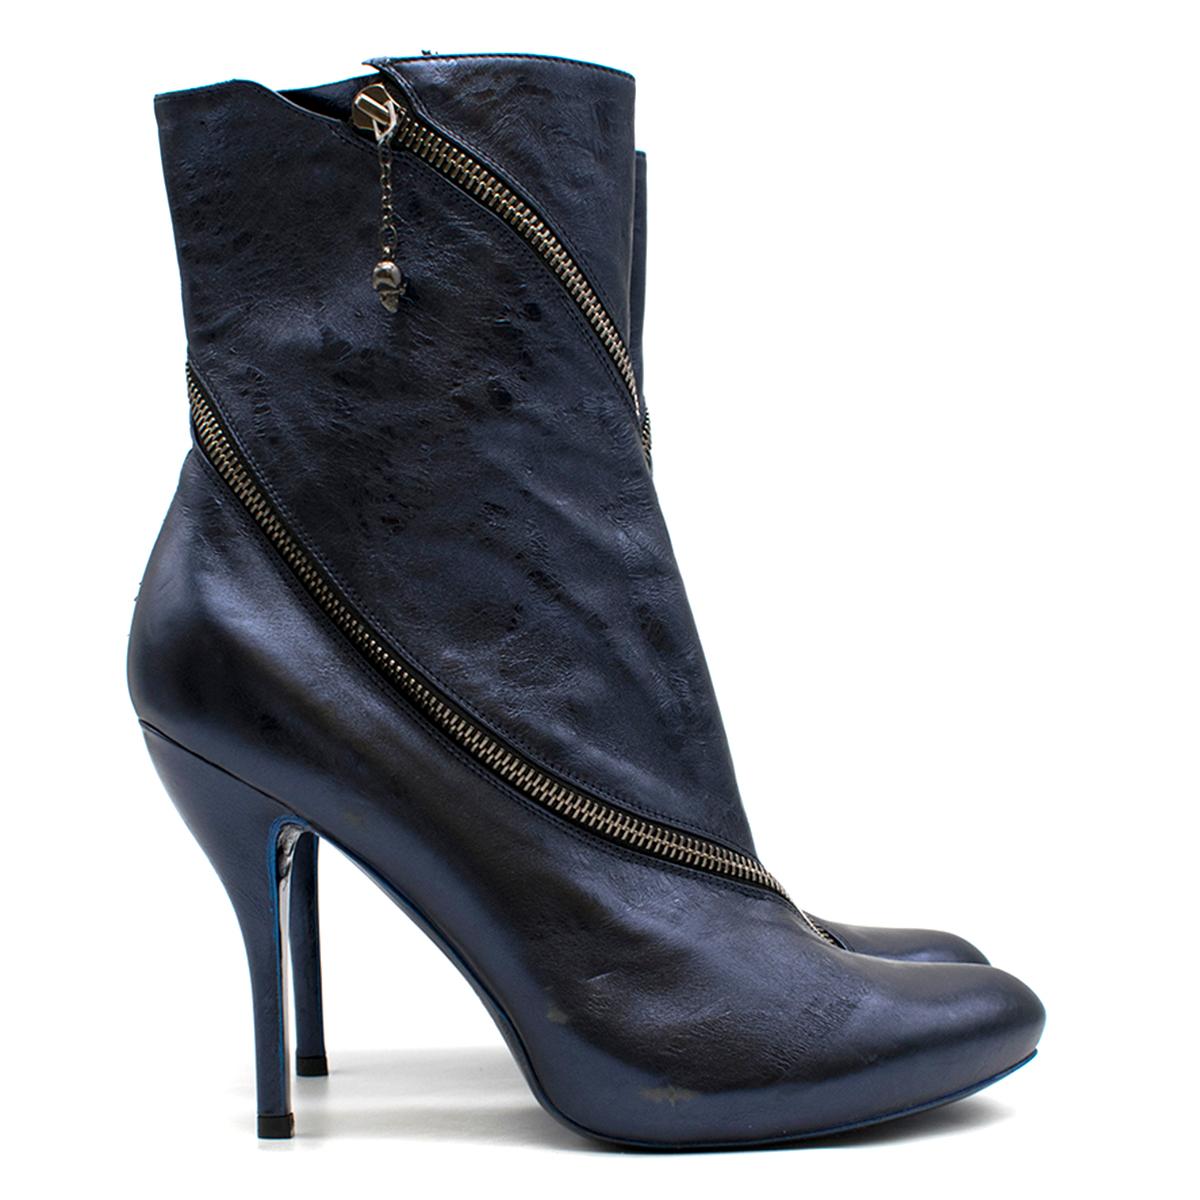 Alexander McQueen Metallic Blue Heeled Ankle Boots

- Metallic blue heeled ankle boots
- Two zips that goes around the shoes
- Rounded toe
- 110mm stiletto heel
- Leather lining
- Blue leather sole
- This item comes with the original dust